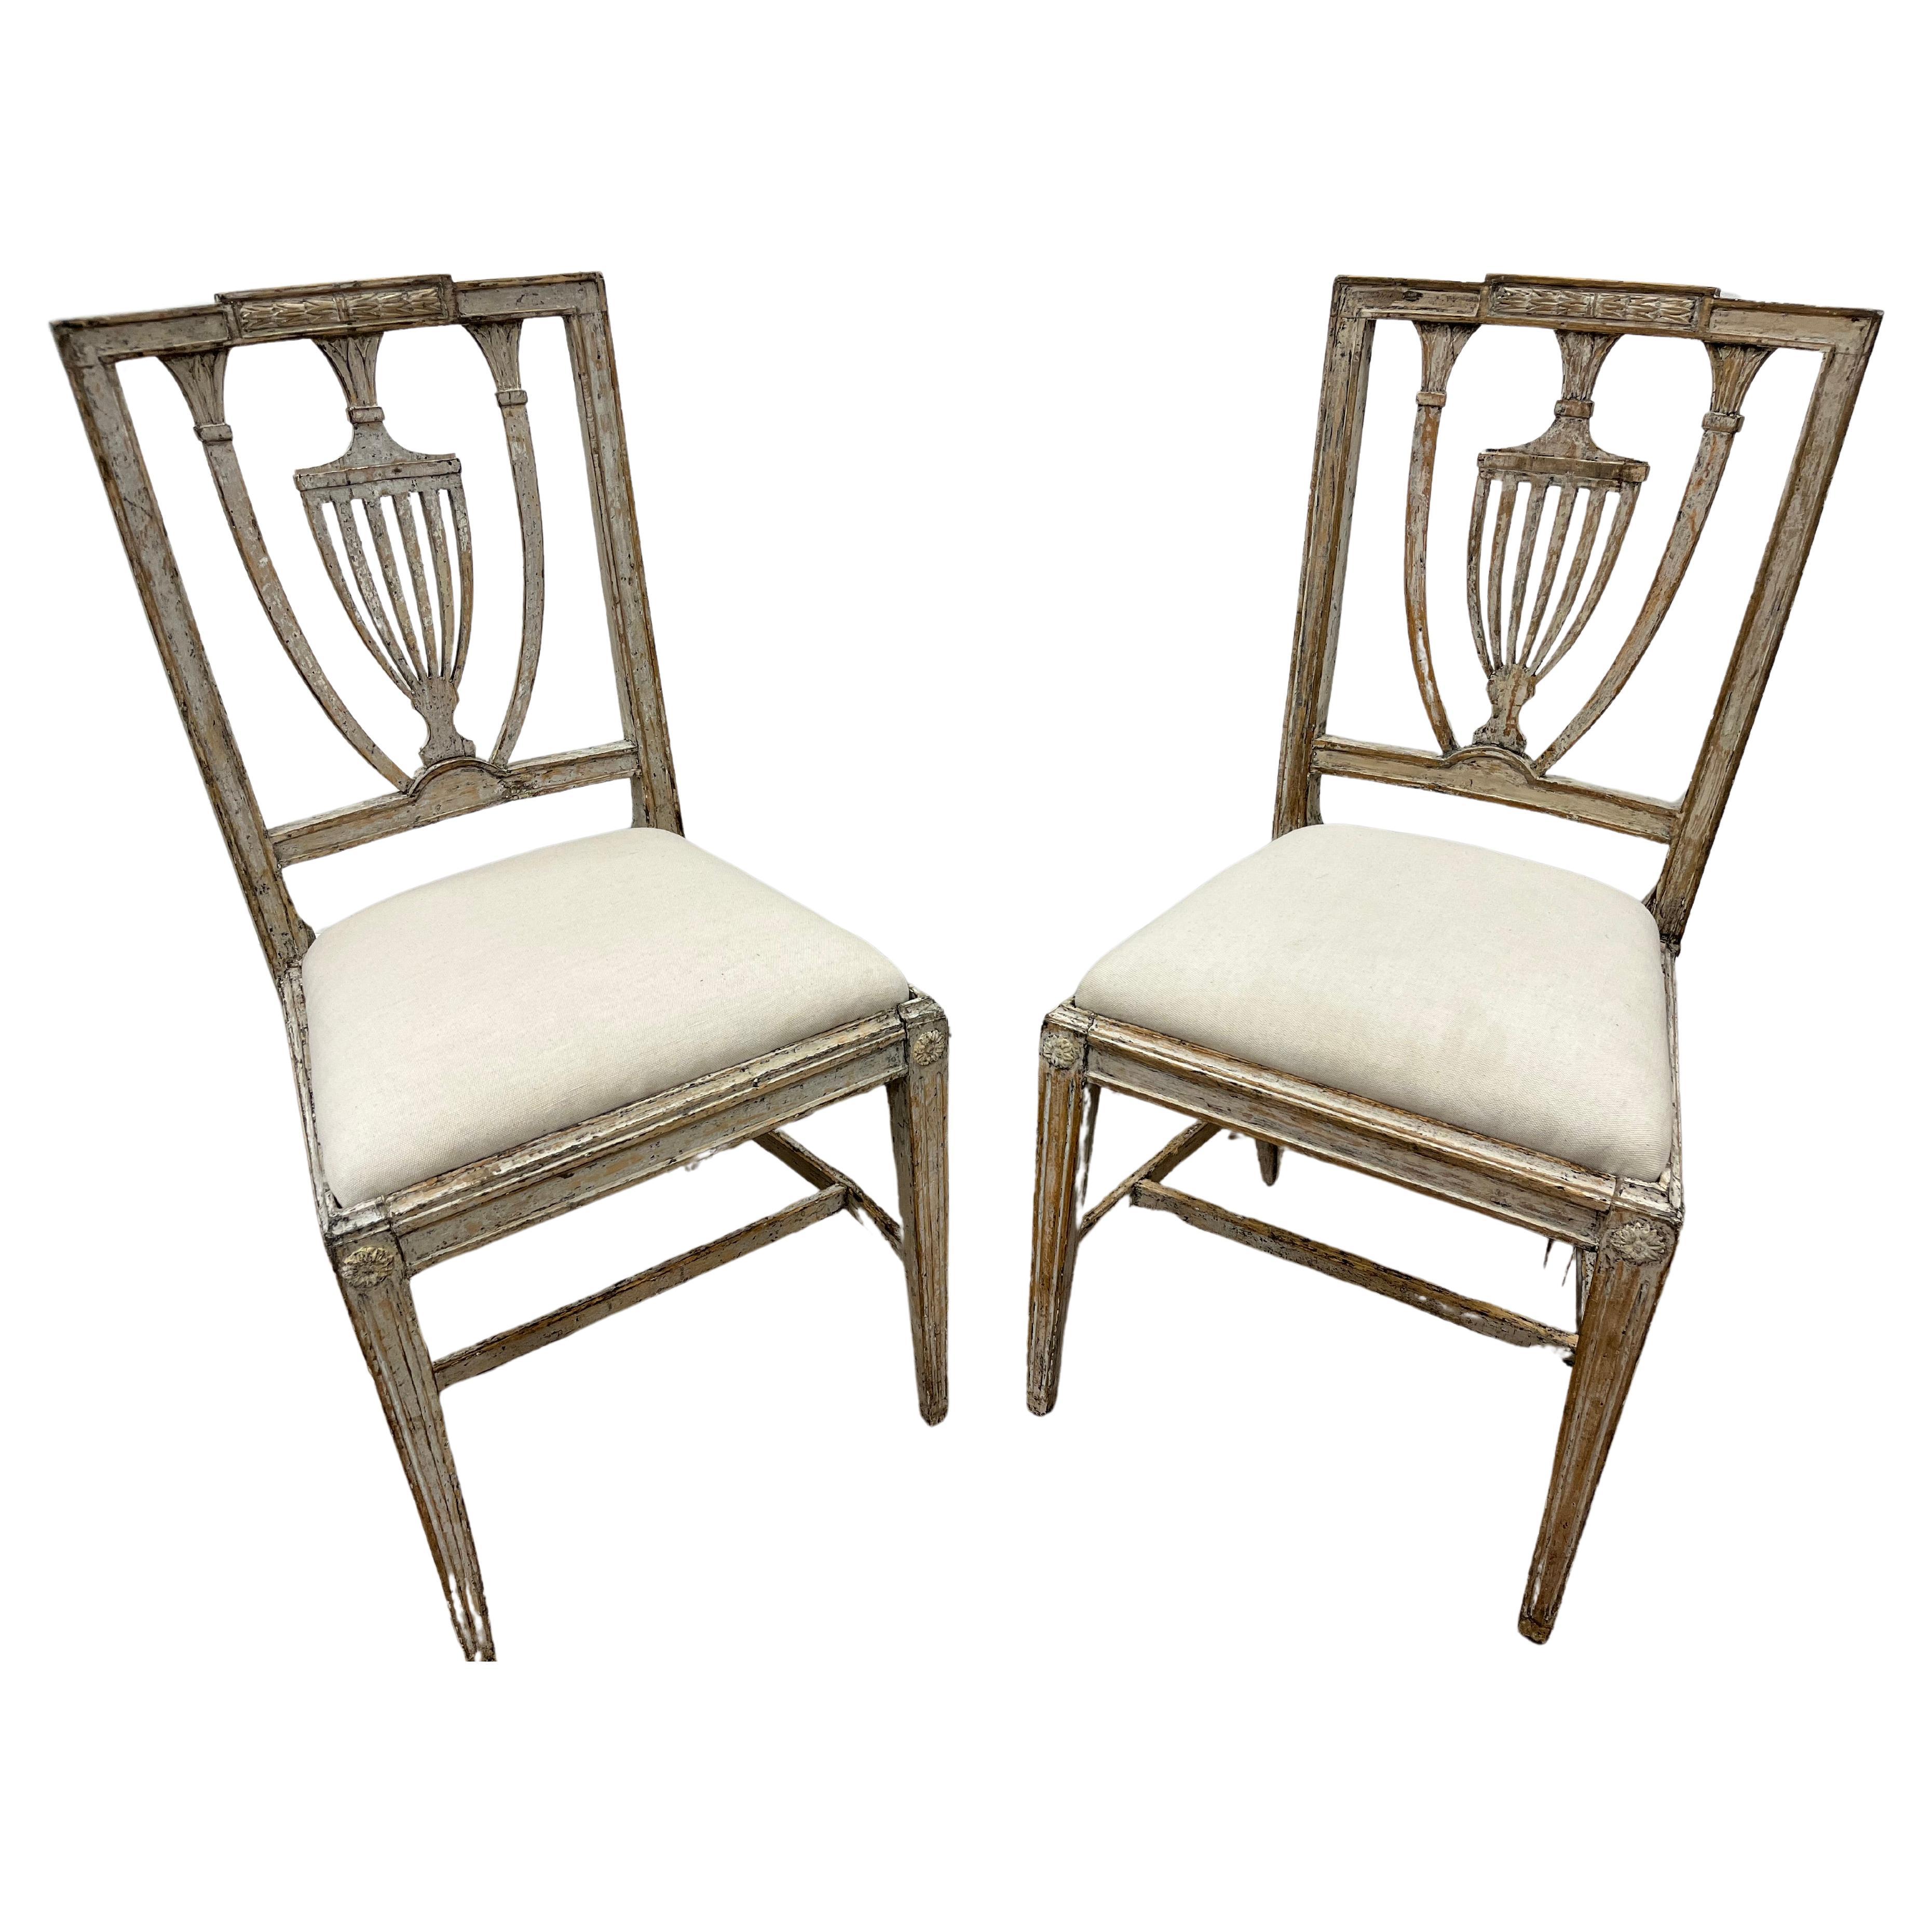 Pair of 19th Century Swedish Gustavian Chairs For Sale